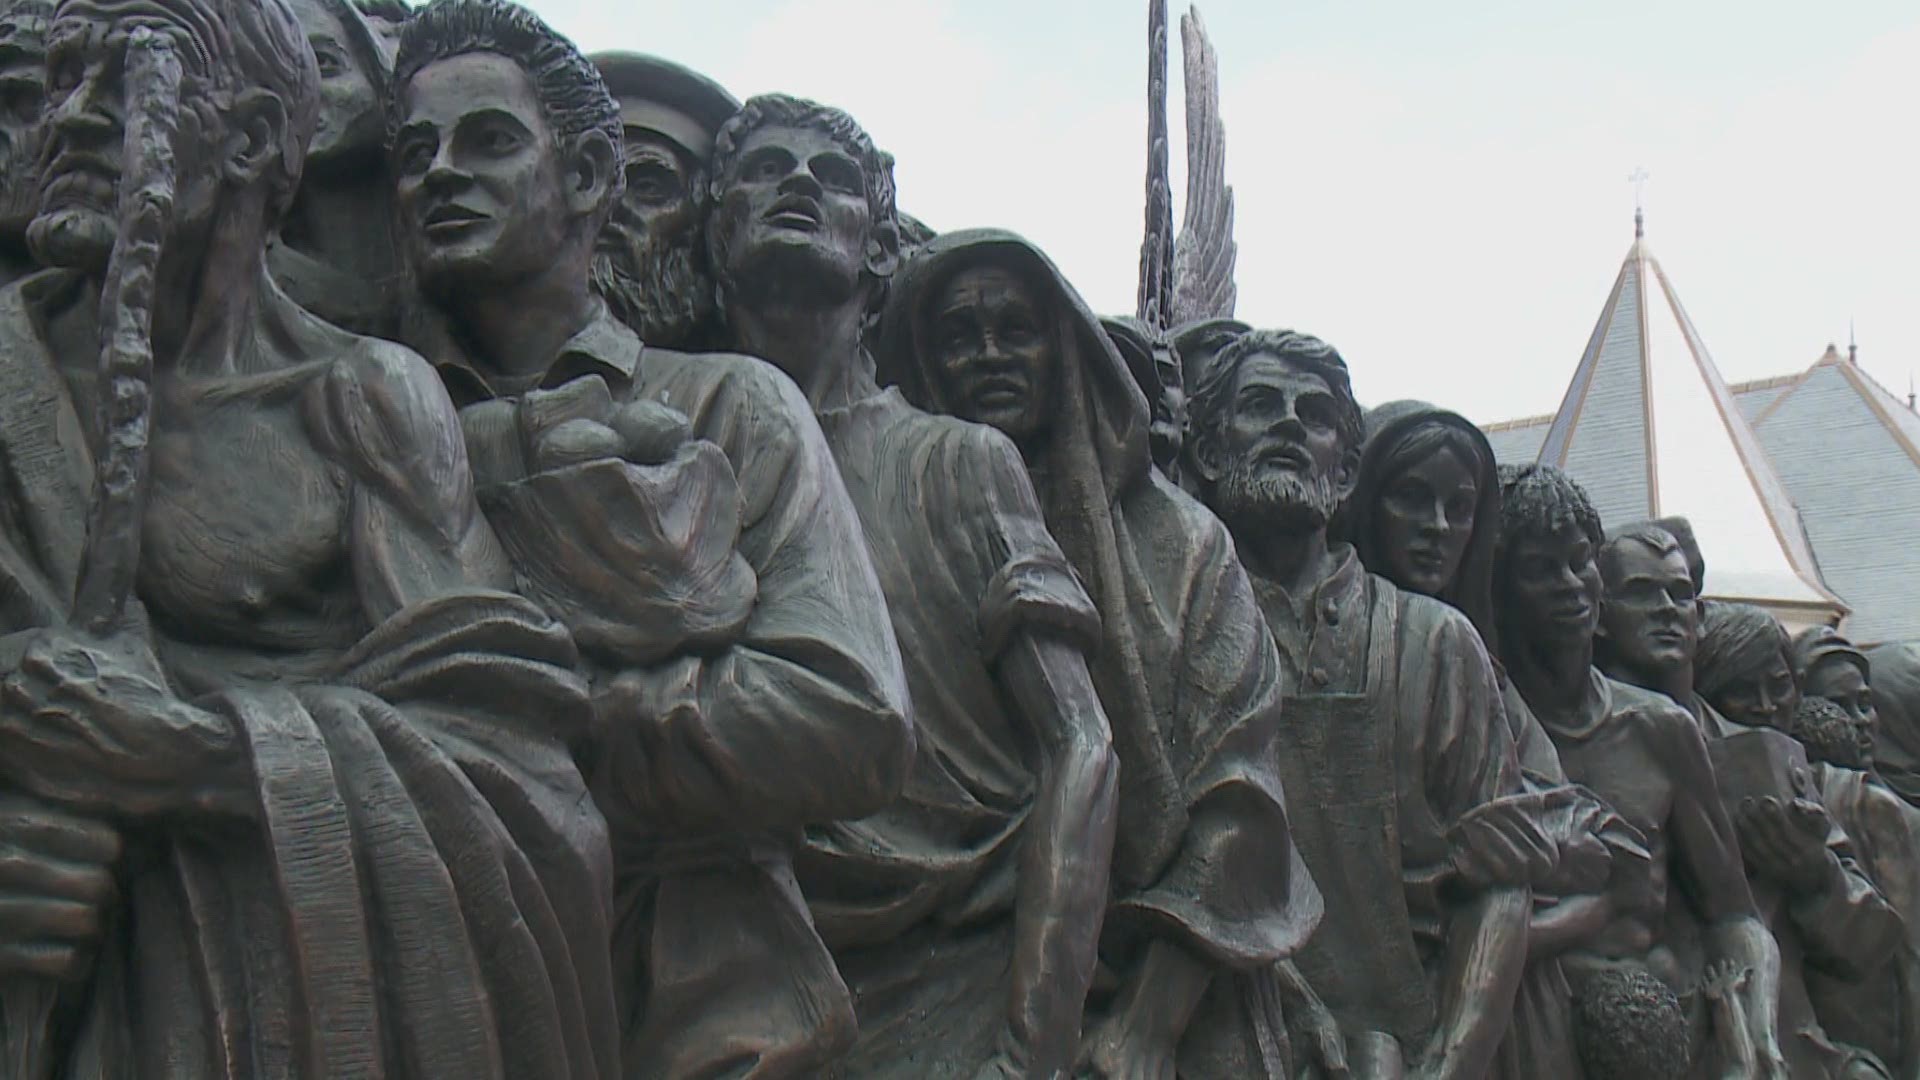 A new statue installed by the Archdiocese of New Orleans is set to emphasize the Catholic message of the value refugees bring to communities.